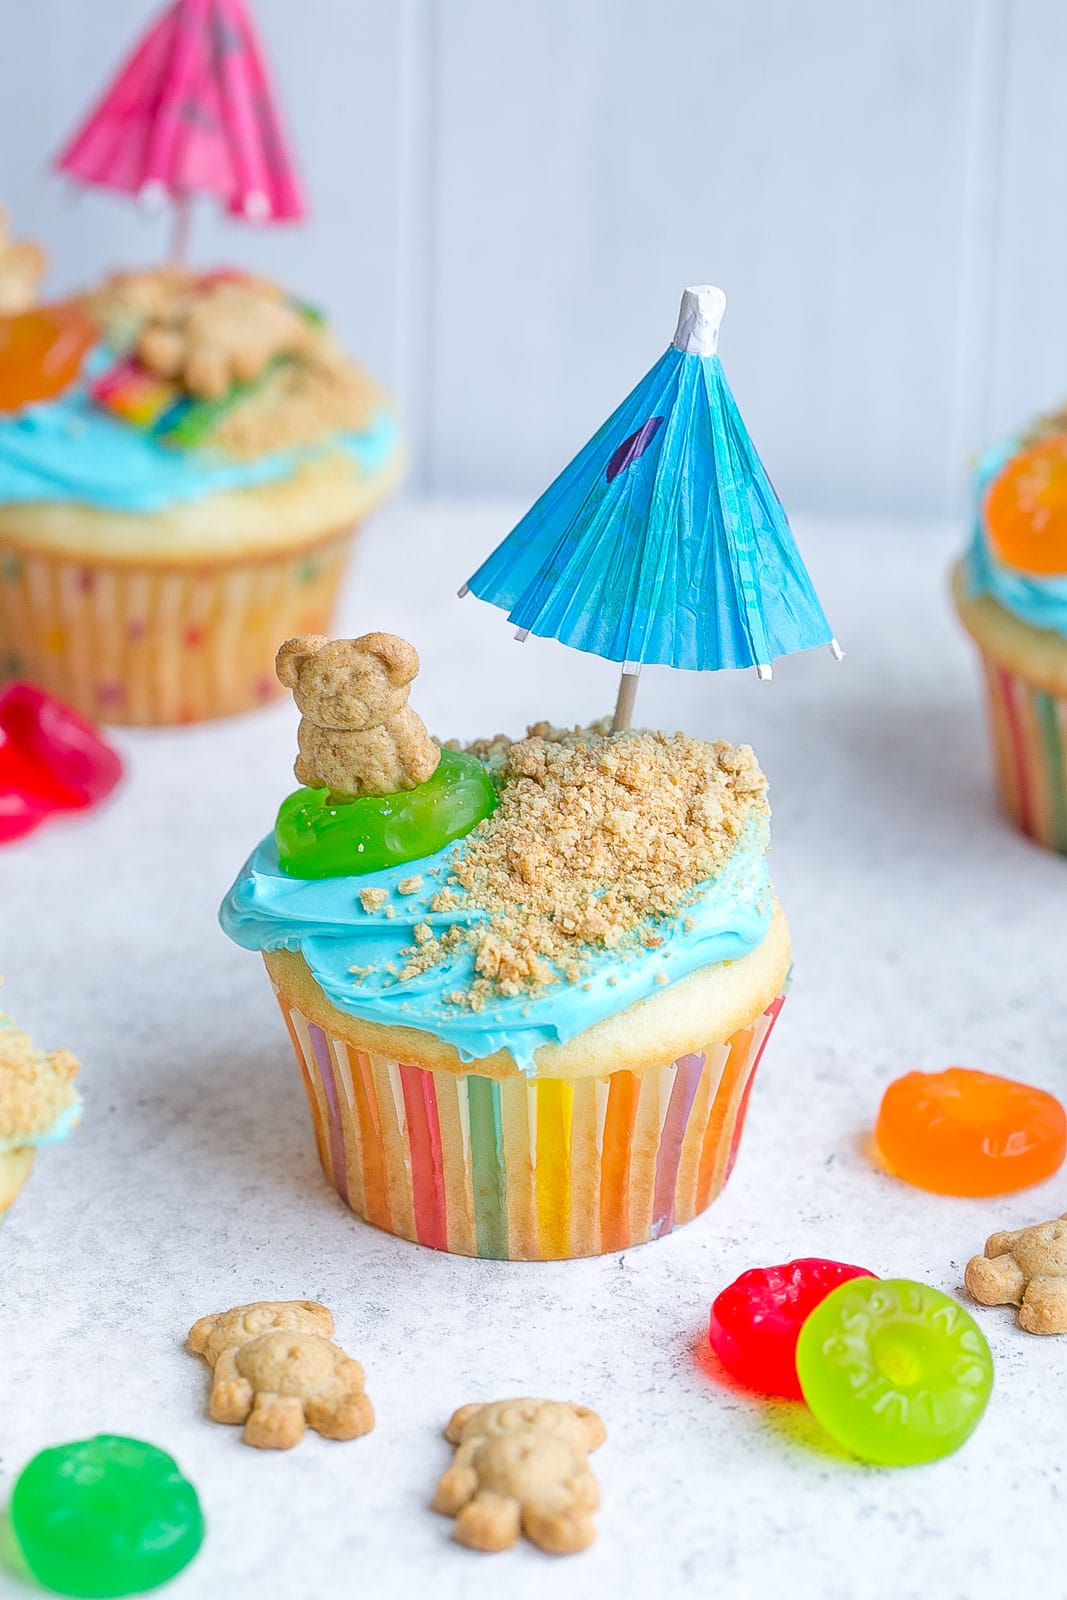 Beach cupcakes with paper umbrellas and teddy grahams.